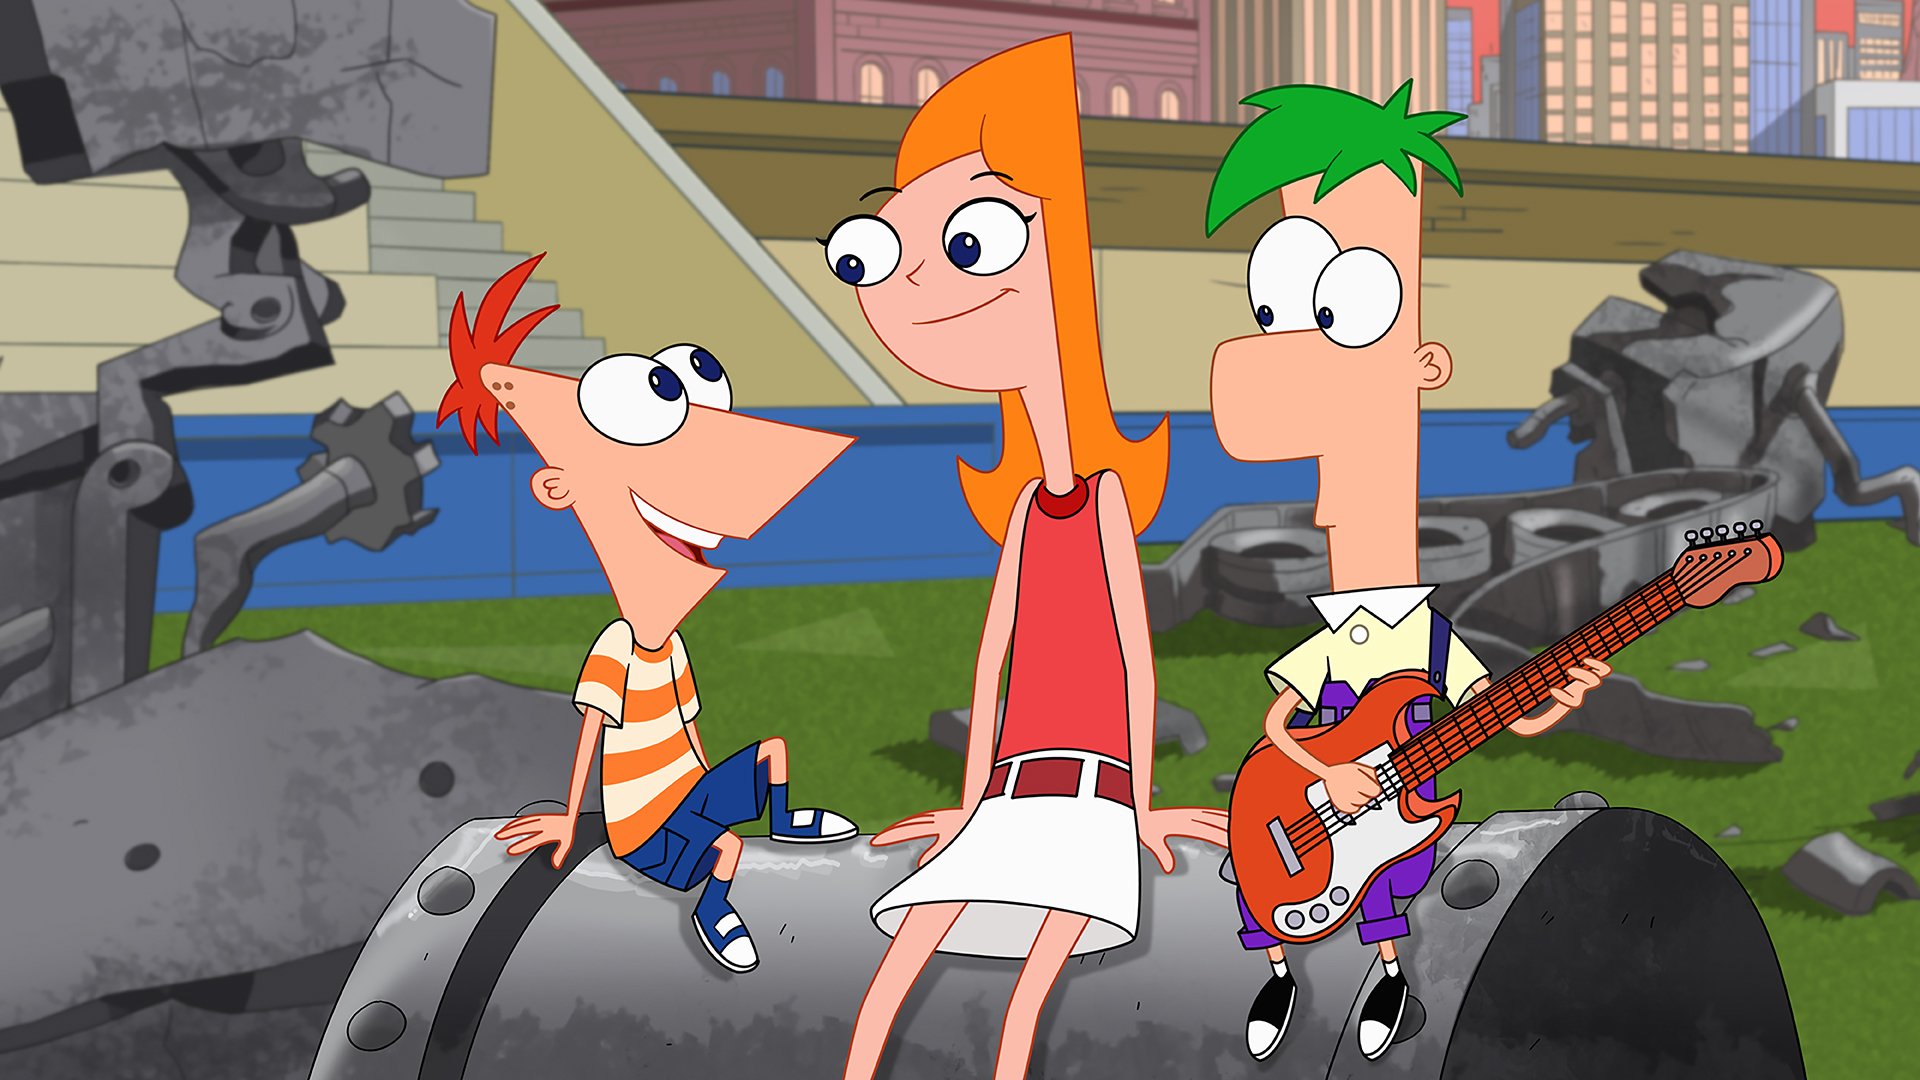 Phineas, Candace, and Ferb in the new Disney+ original movie 'Phineas and Ferb The Movie: Candace Against the Universe.'